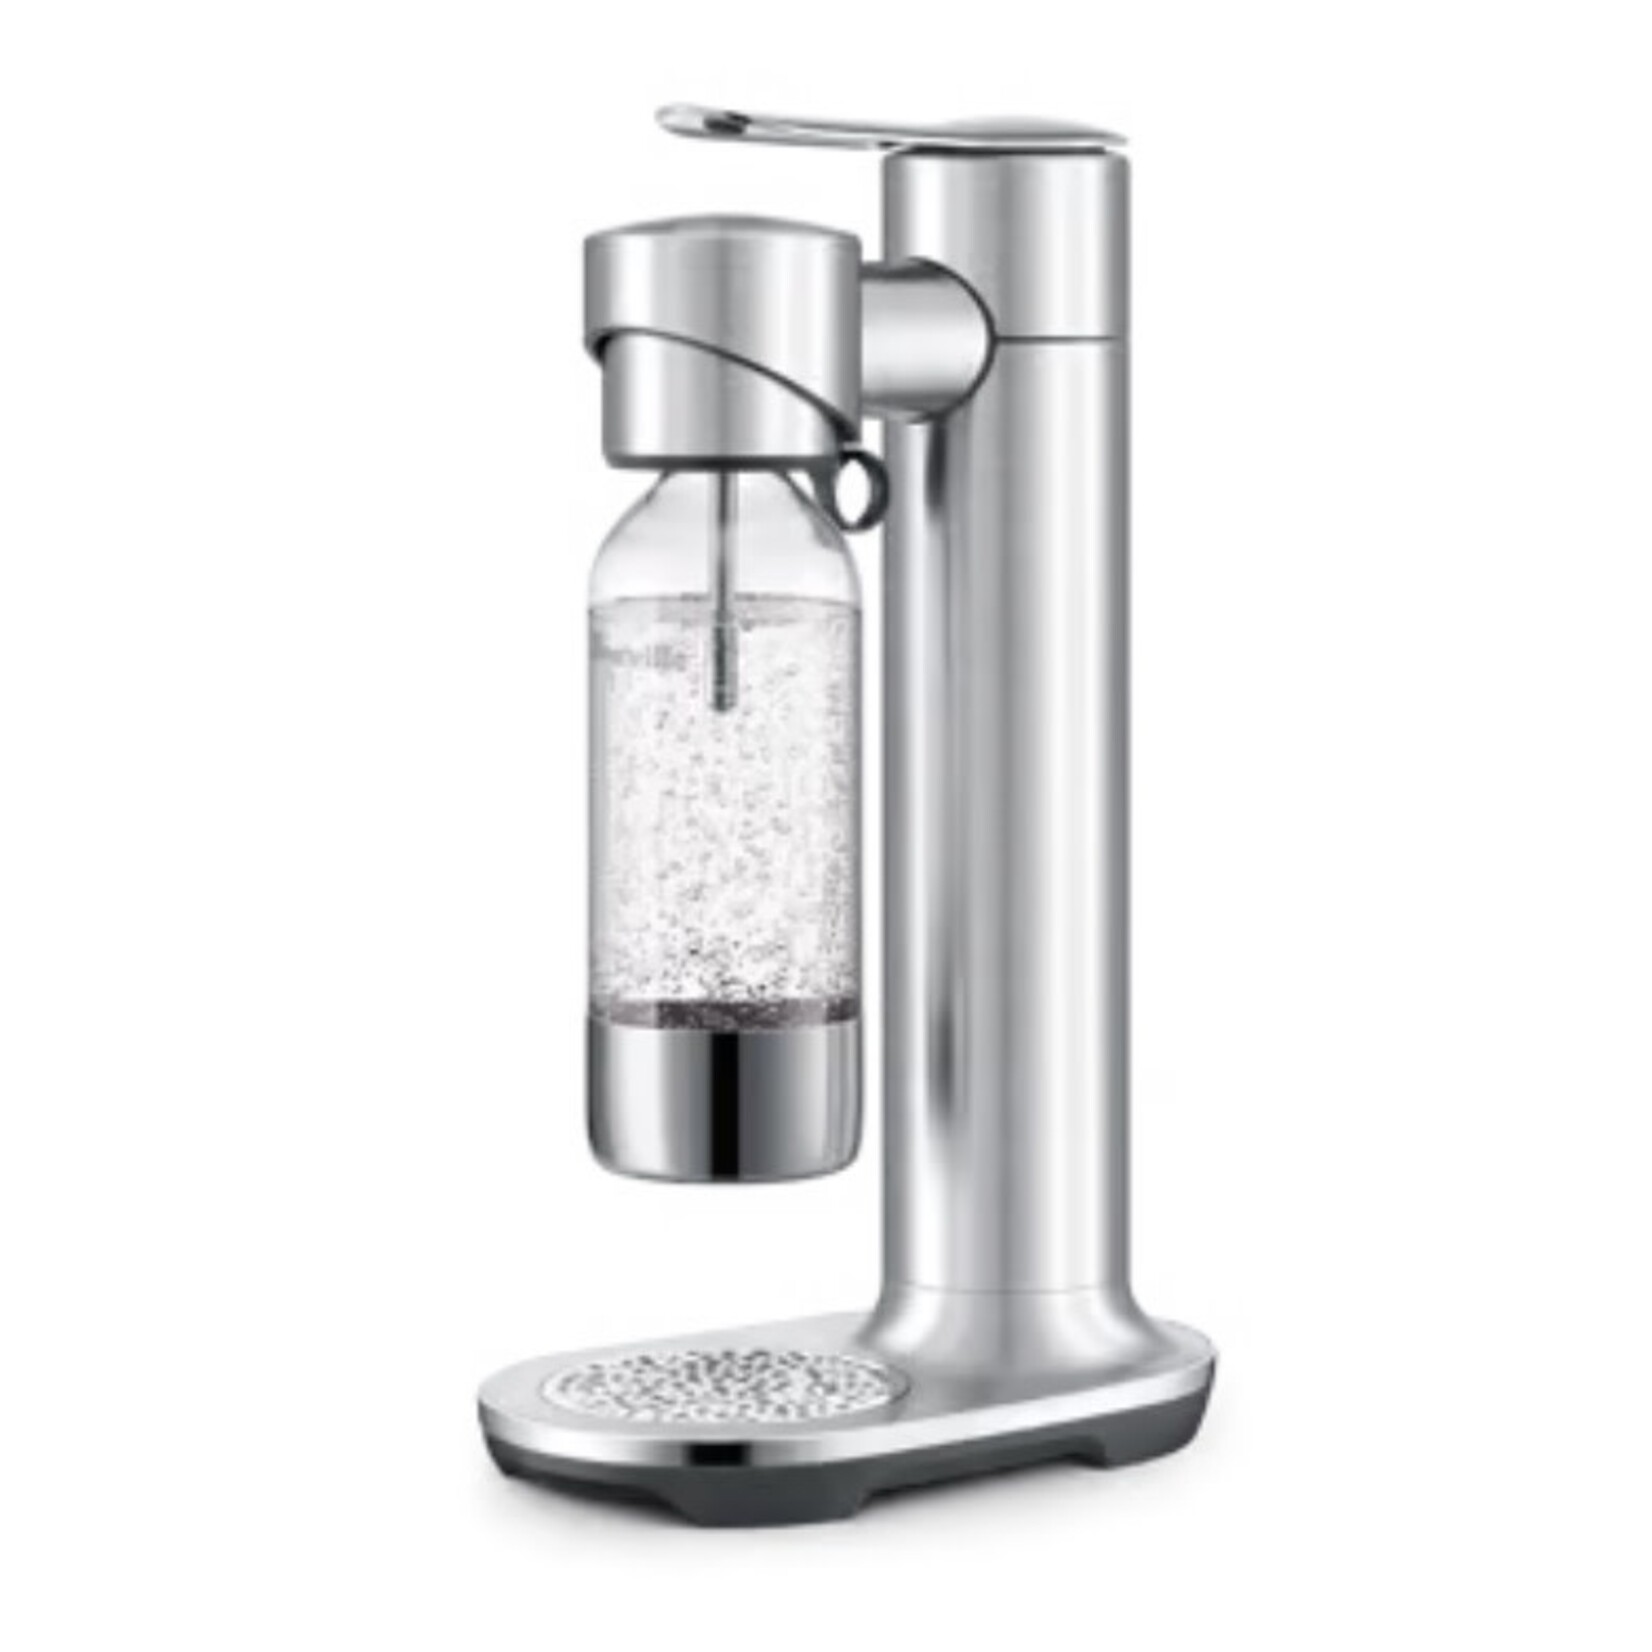 BREVILLE BREVILLE The InFizz Aqua w/CO2 Canister - Brushed Stainless REG $339.99